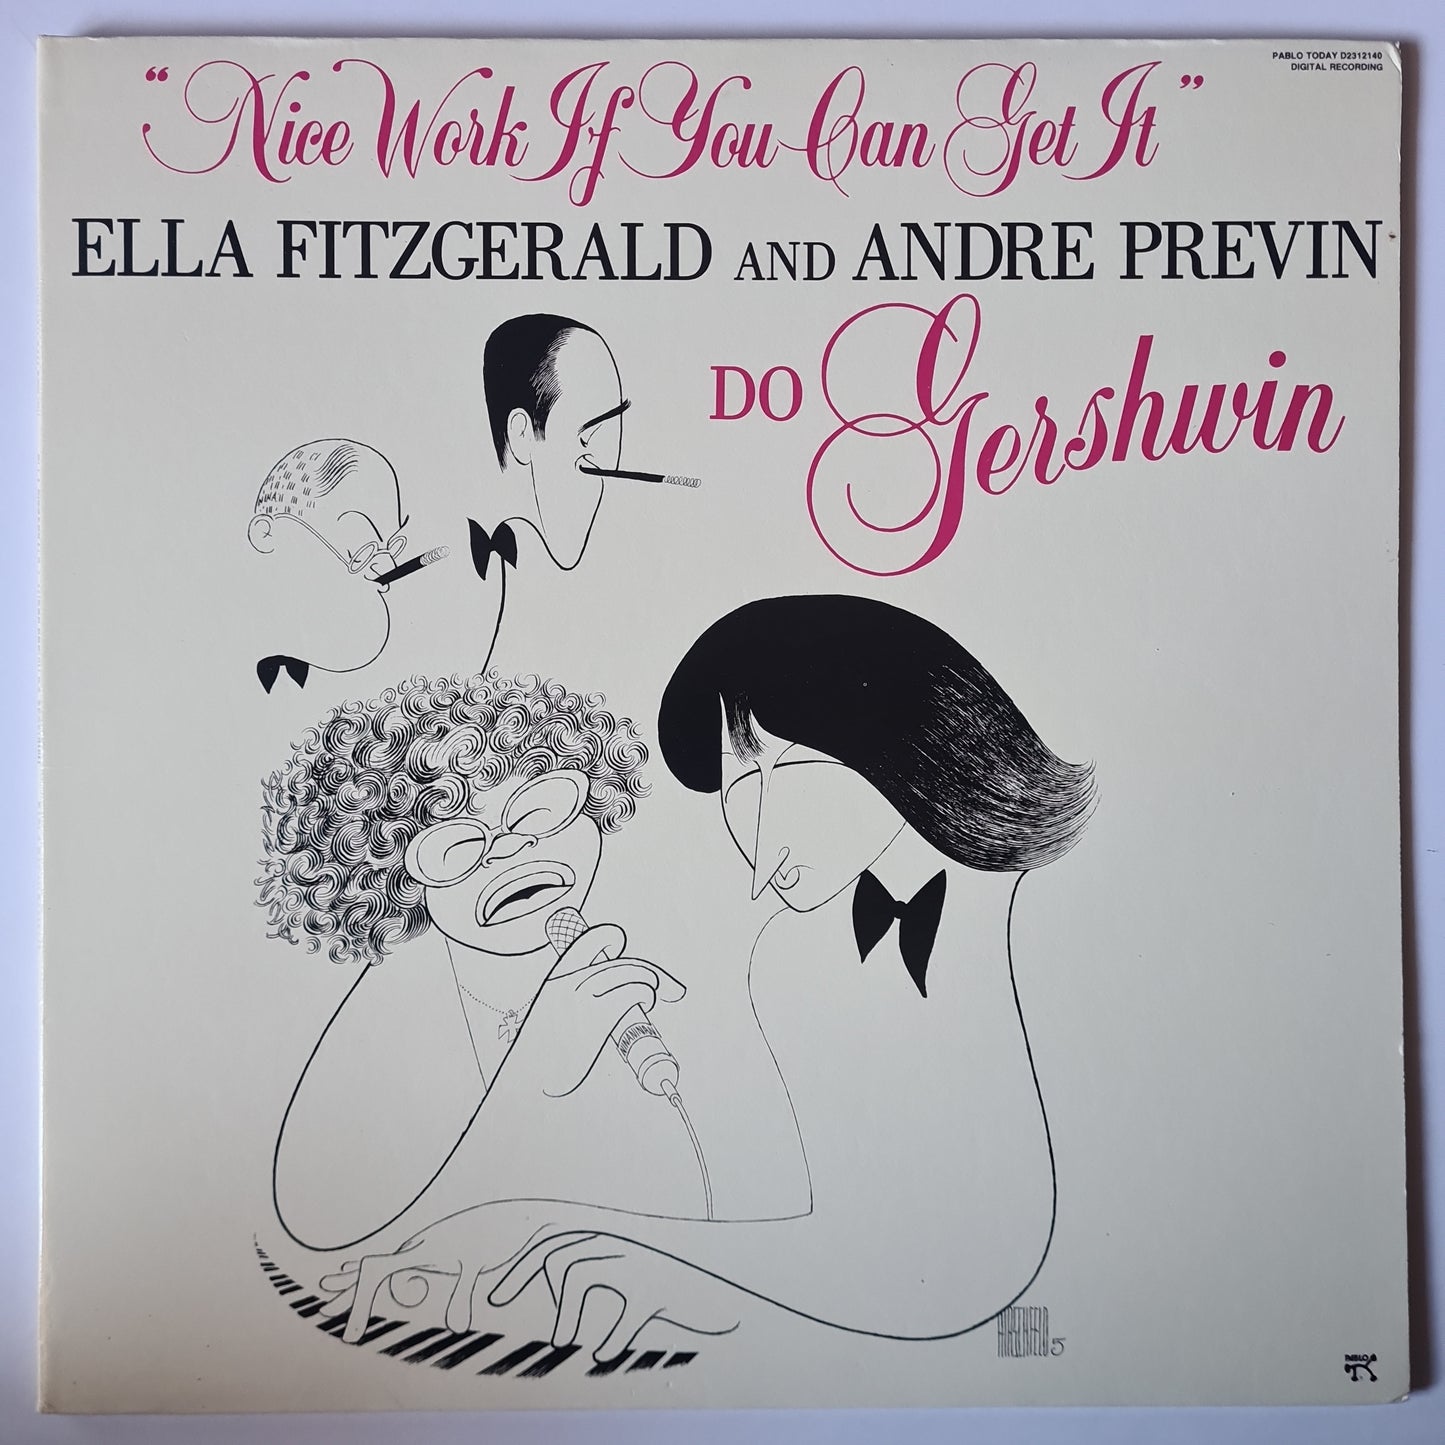 Ella Fitzgerald & Andre Previn – Nice Work If You Can Get It - Ella Fitzgerald And Andre Previn Do Gershwin - 1983 Pressing - Vinyl Record